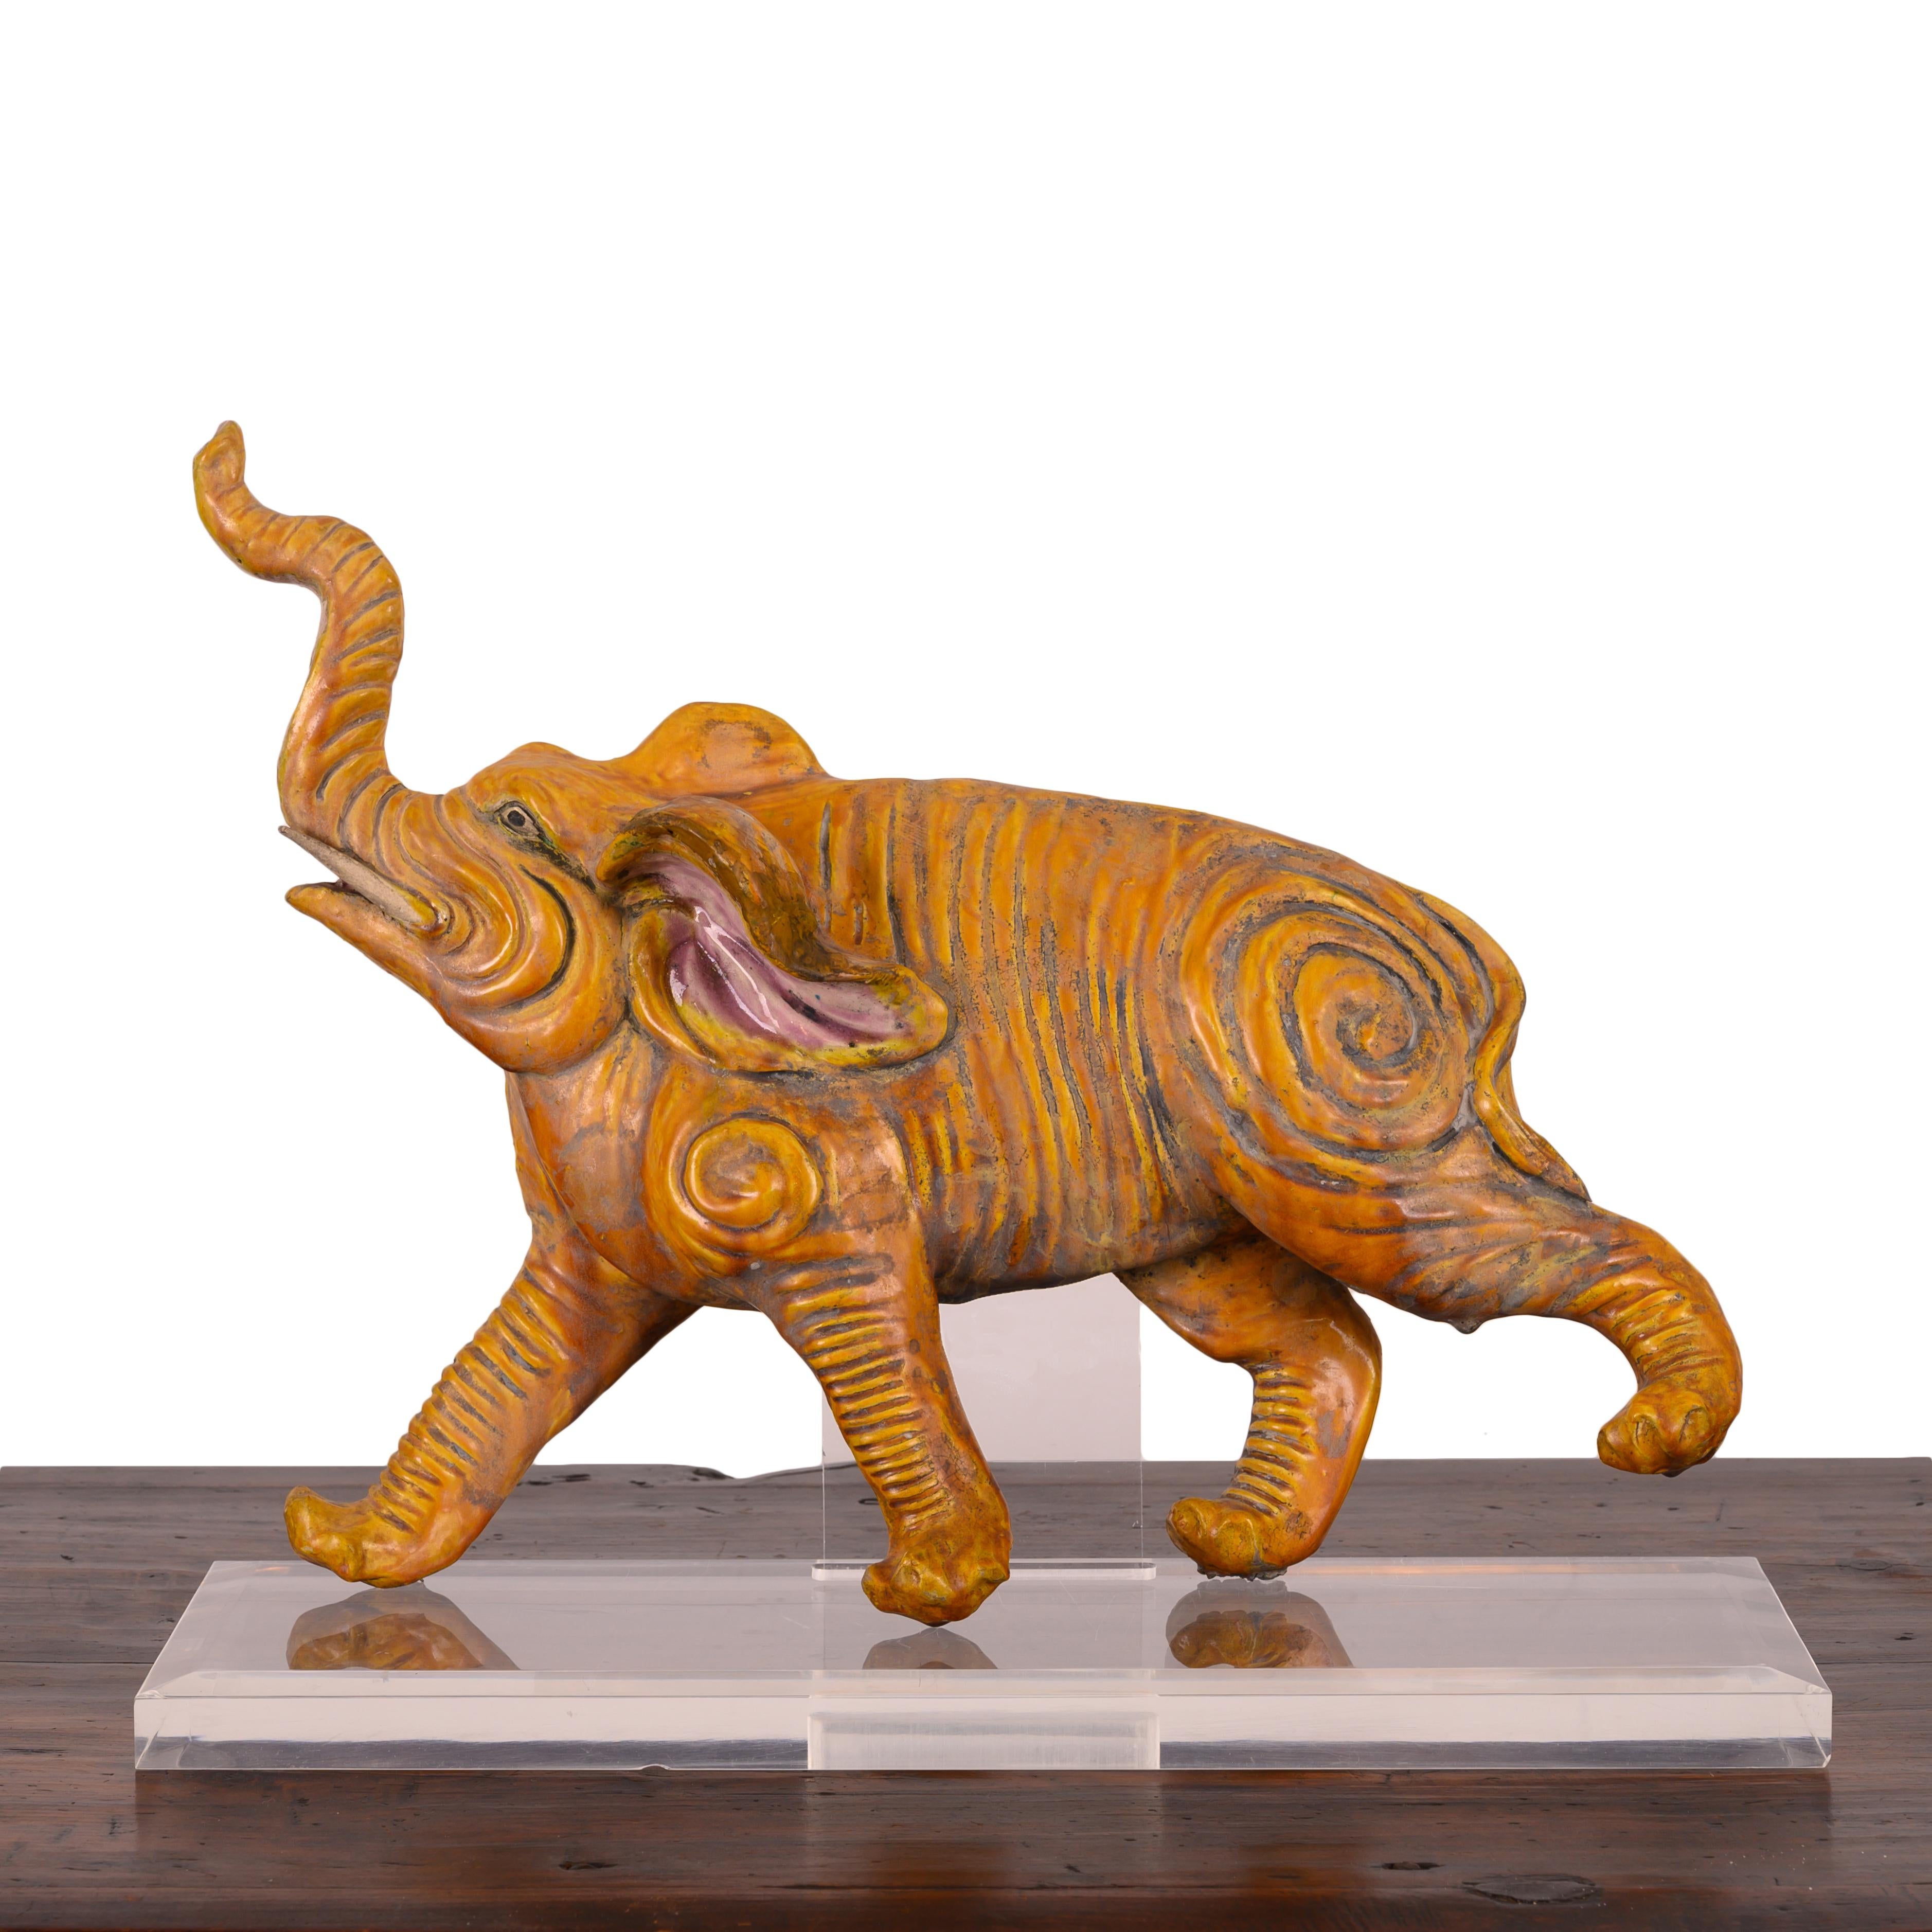 A Chinese elephant roof tile on lucite base, 19th Century.

19 ½ inches wide by 7 ½ inches deep by 15 inches tall